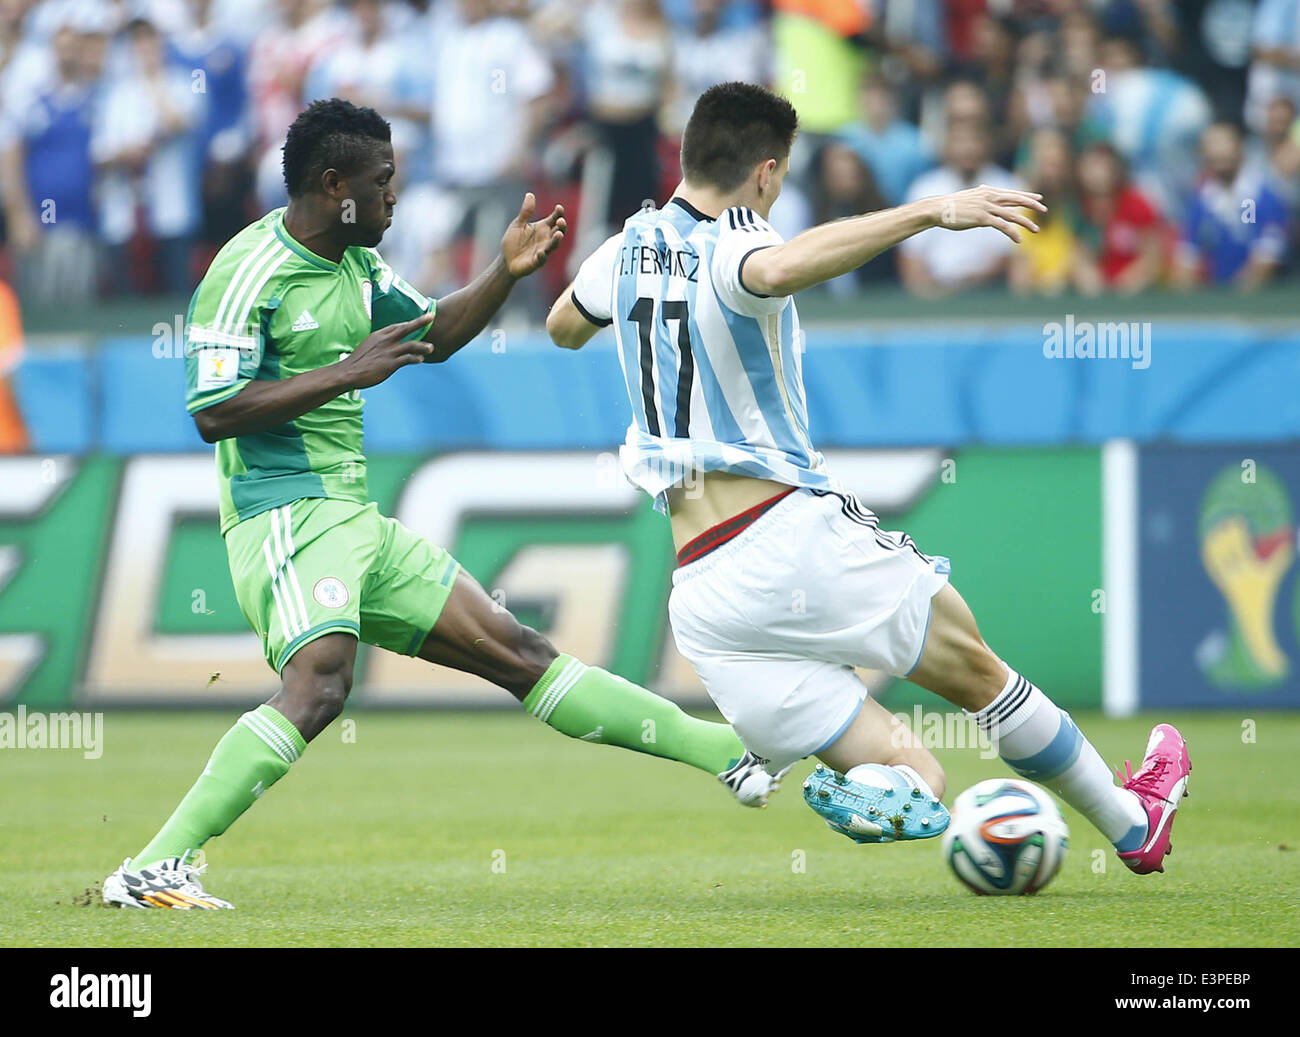 Porto Alegre, Brazil. 25th June, 2014. Argentina's Federico Fernandez (R) competes during a Group F match between Nigeria and Argentina of 2014 FIFA World Cup at the Estadio Beira-Rio Stadium in Porto Alegre, Brazil, on June 25, 2014. © Chen Jianli/Xinhua/Alamy Live News Stock Photo